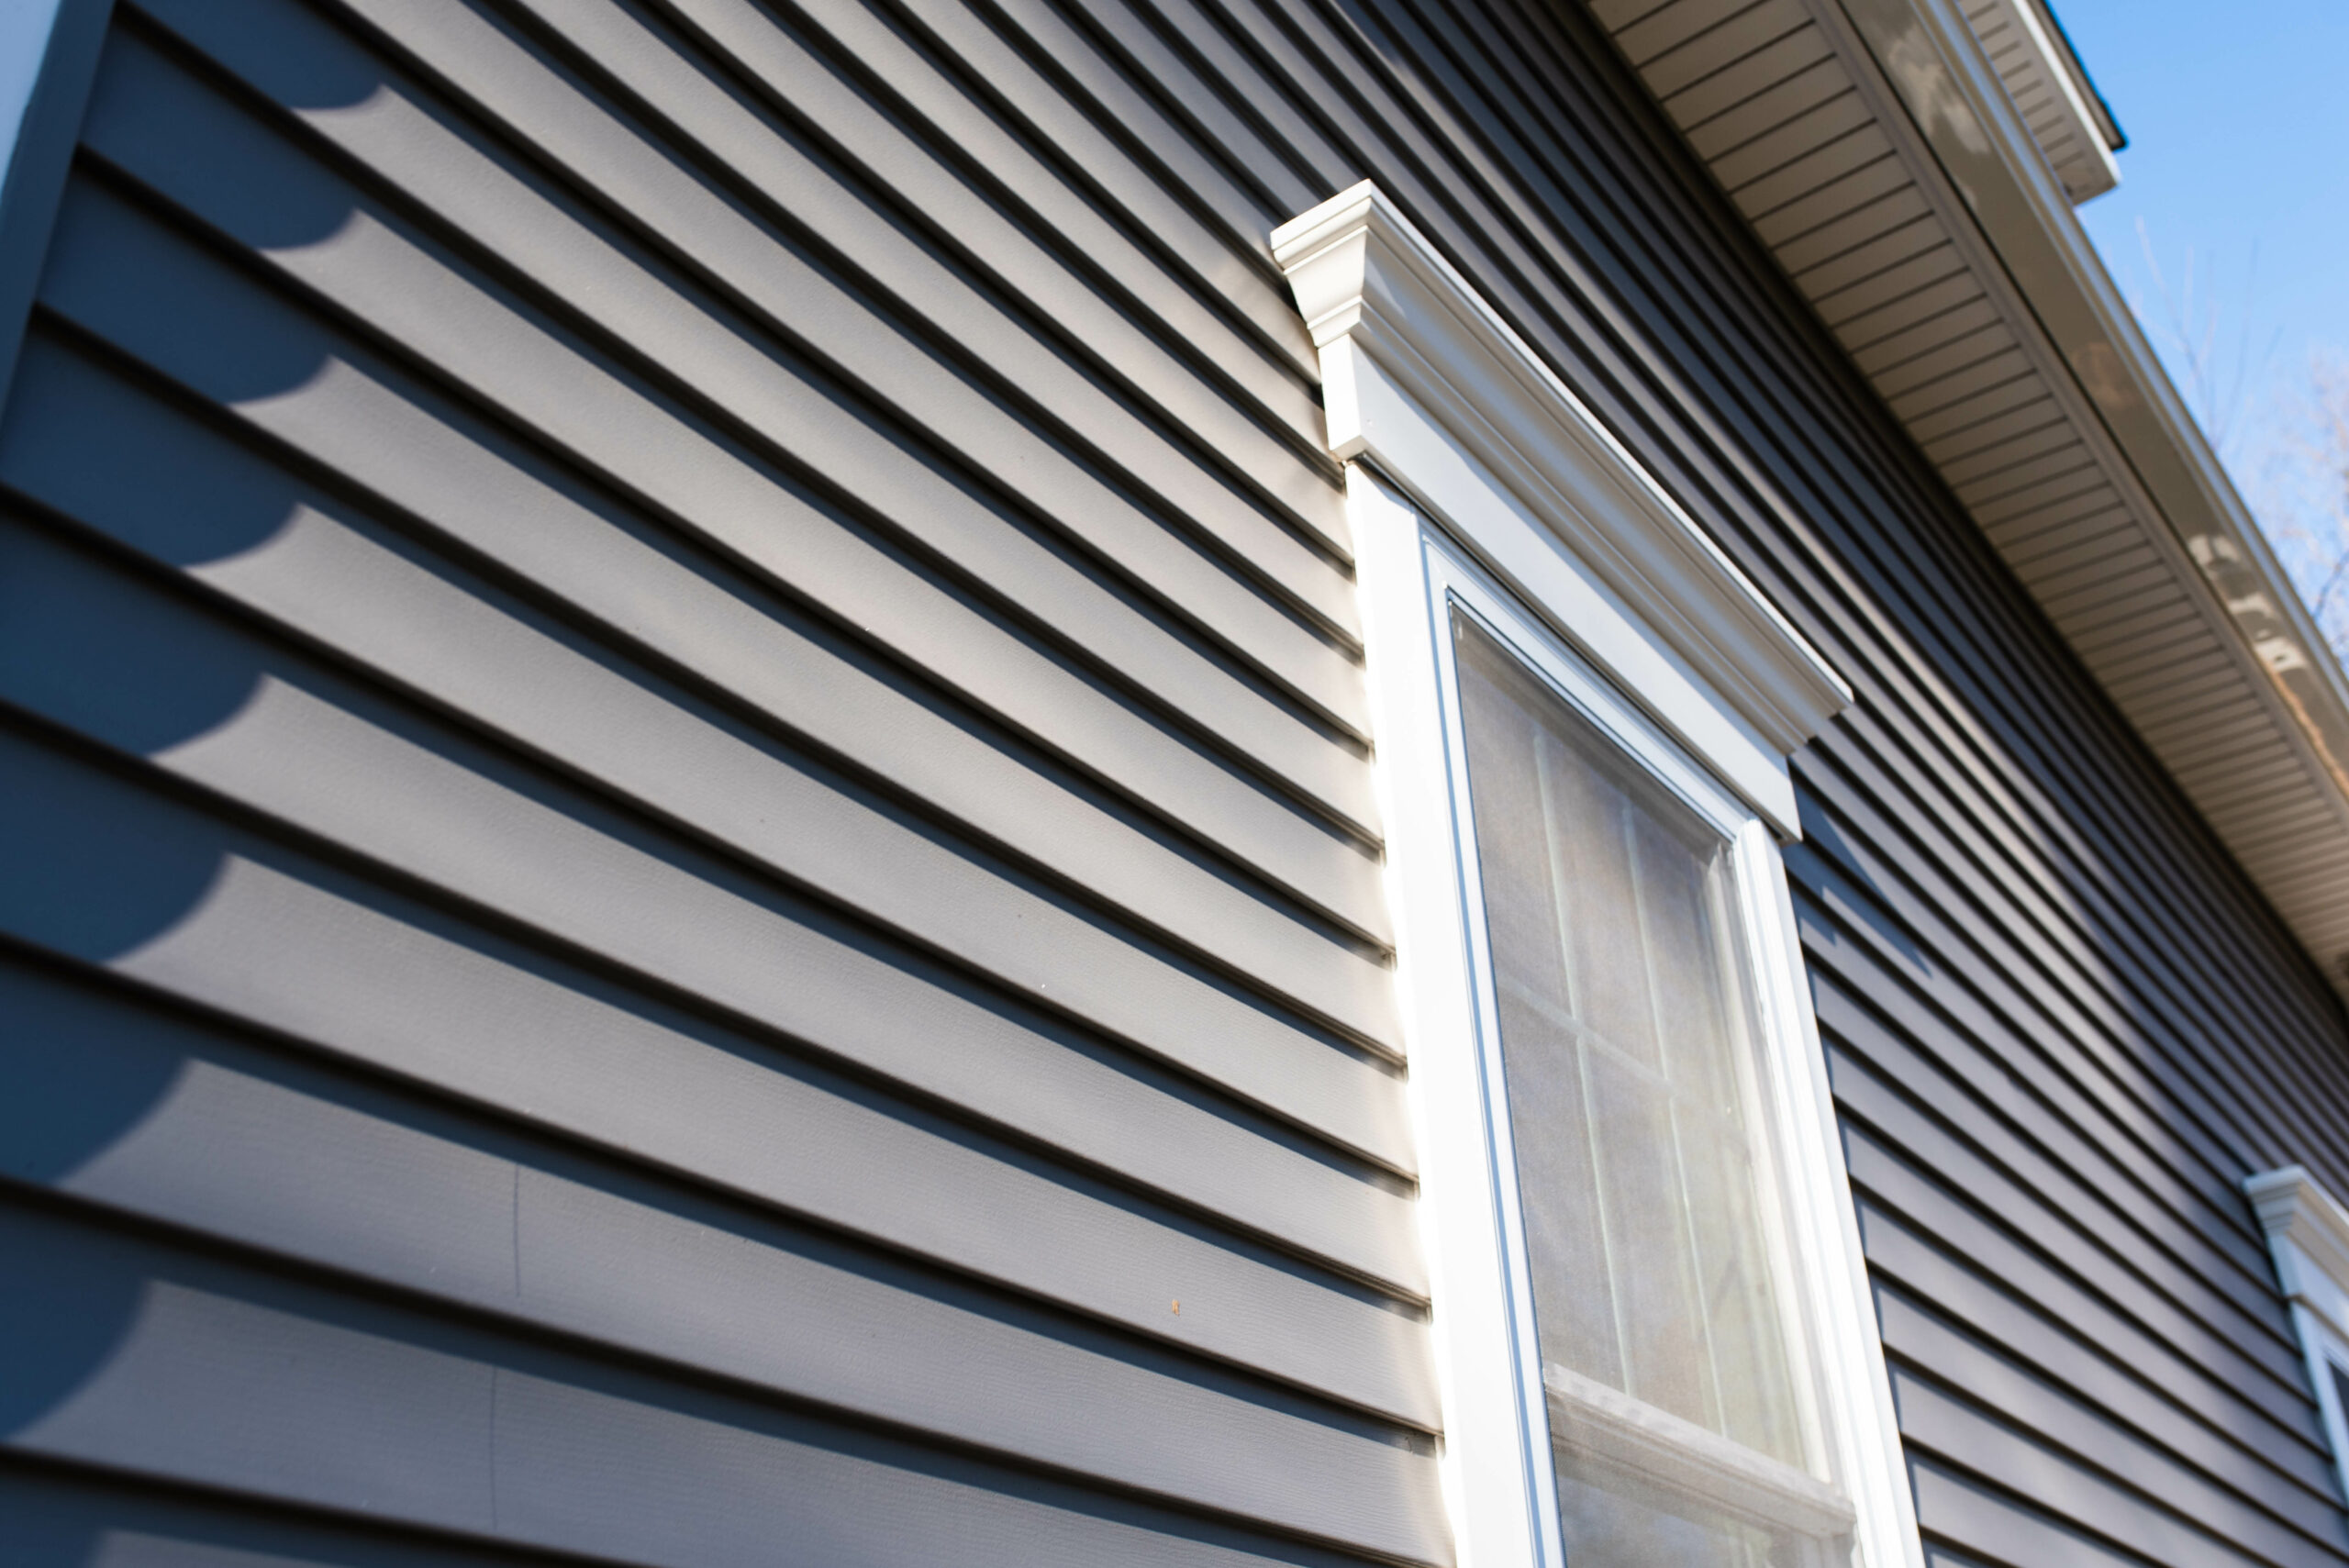 An ultimate home siding guide showcasing a house with vinyl siding and a window.